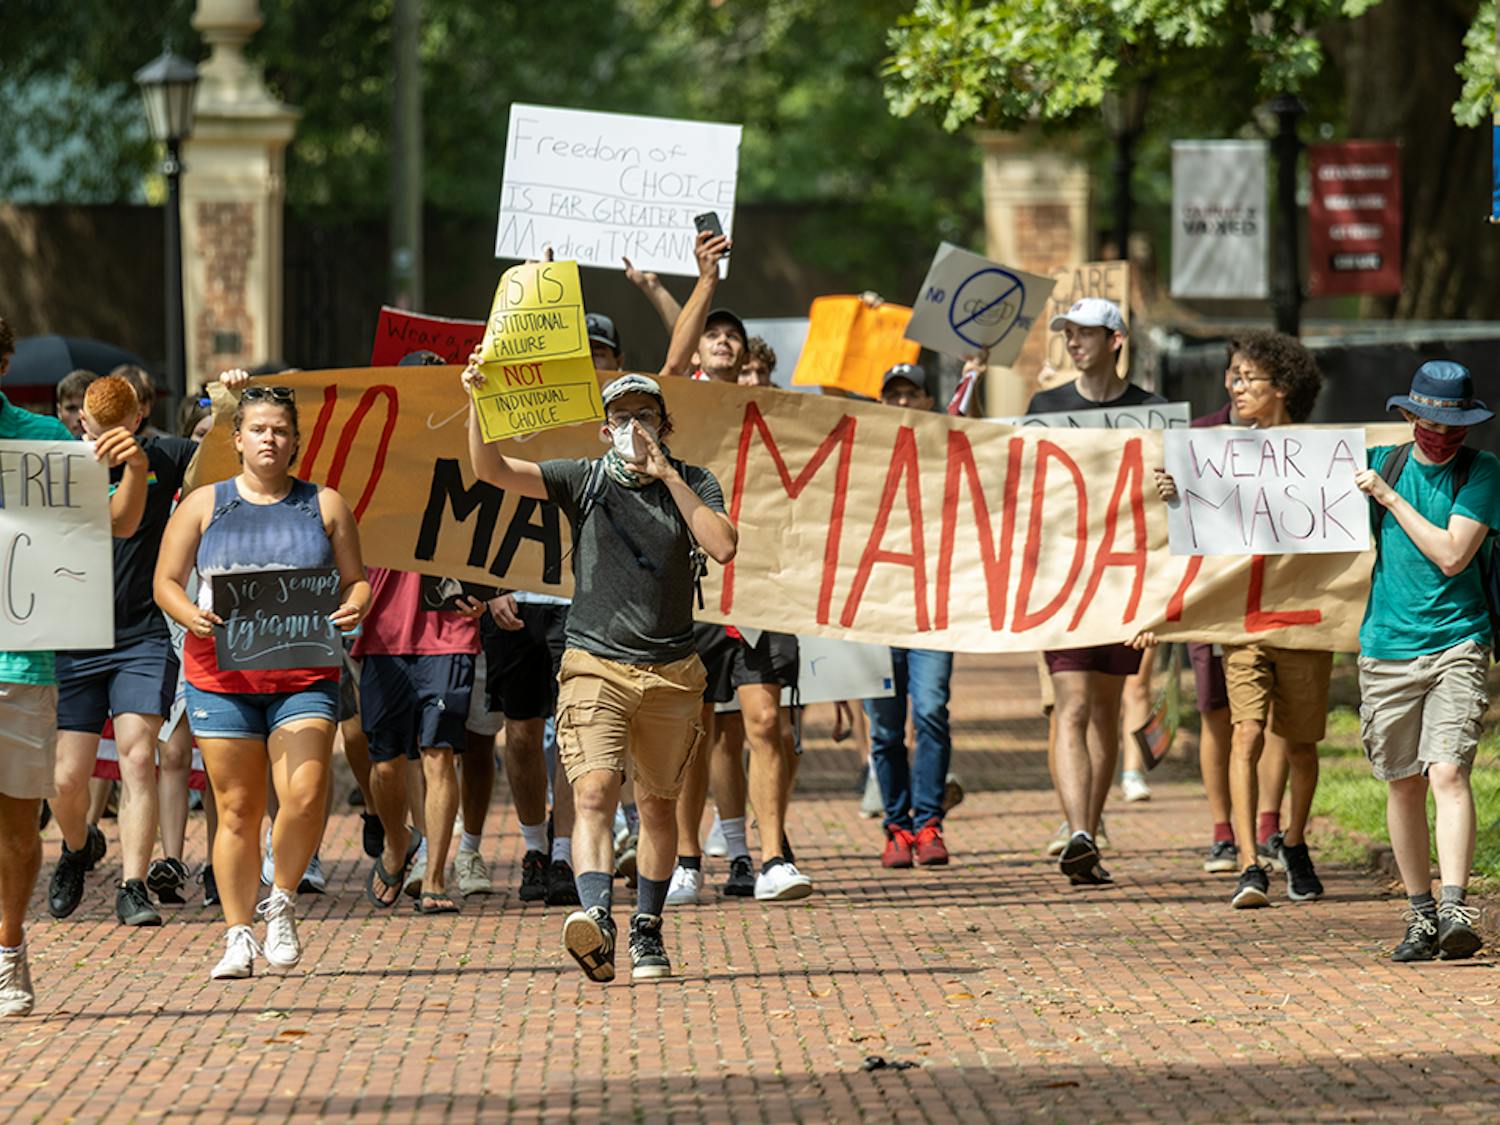 The USC Turning Point USA chapter and the Carolina Socialists protest on the Horseshoe over the mask mandate. The mask mandate was put in place by interim university President Harris Pastides on Aug. 18, 2021.